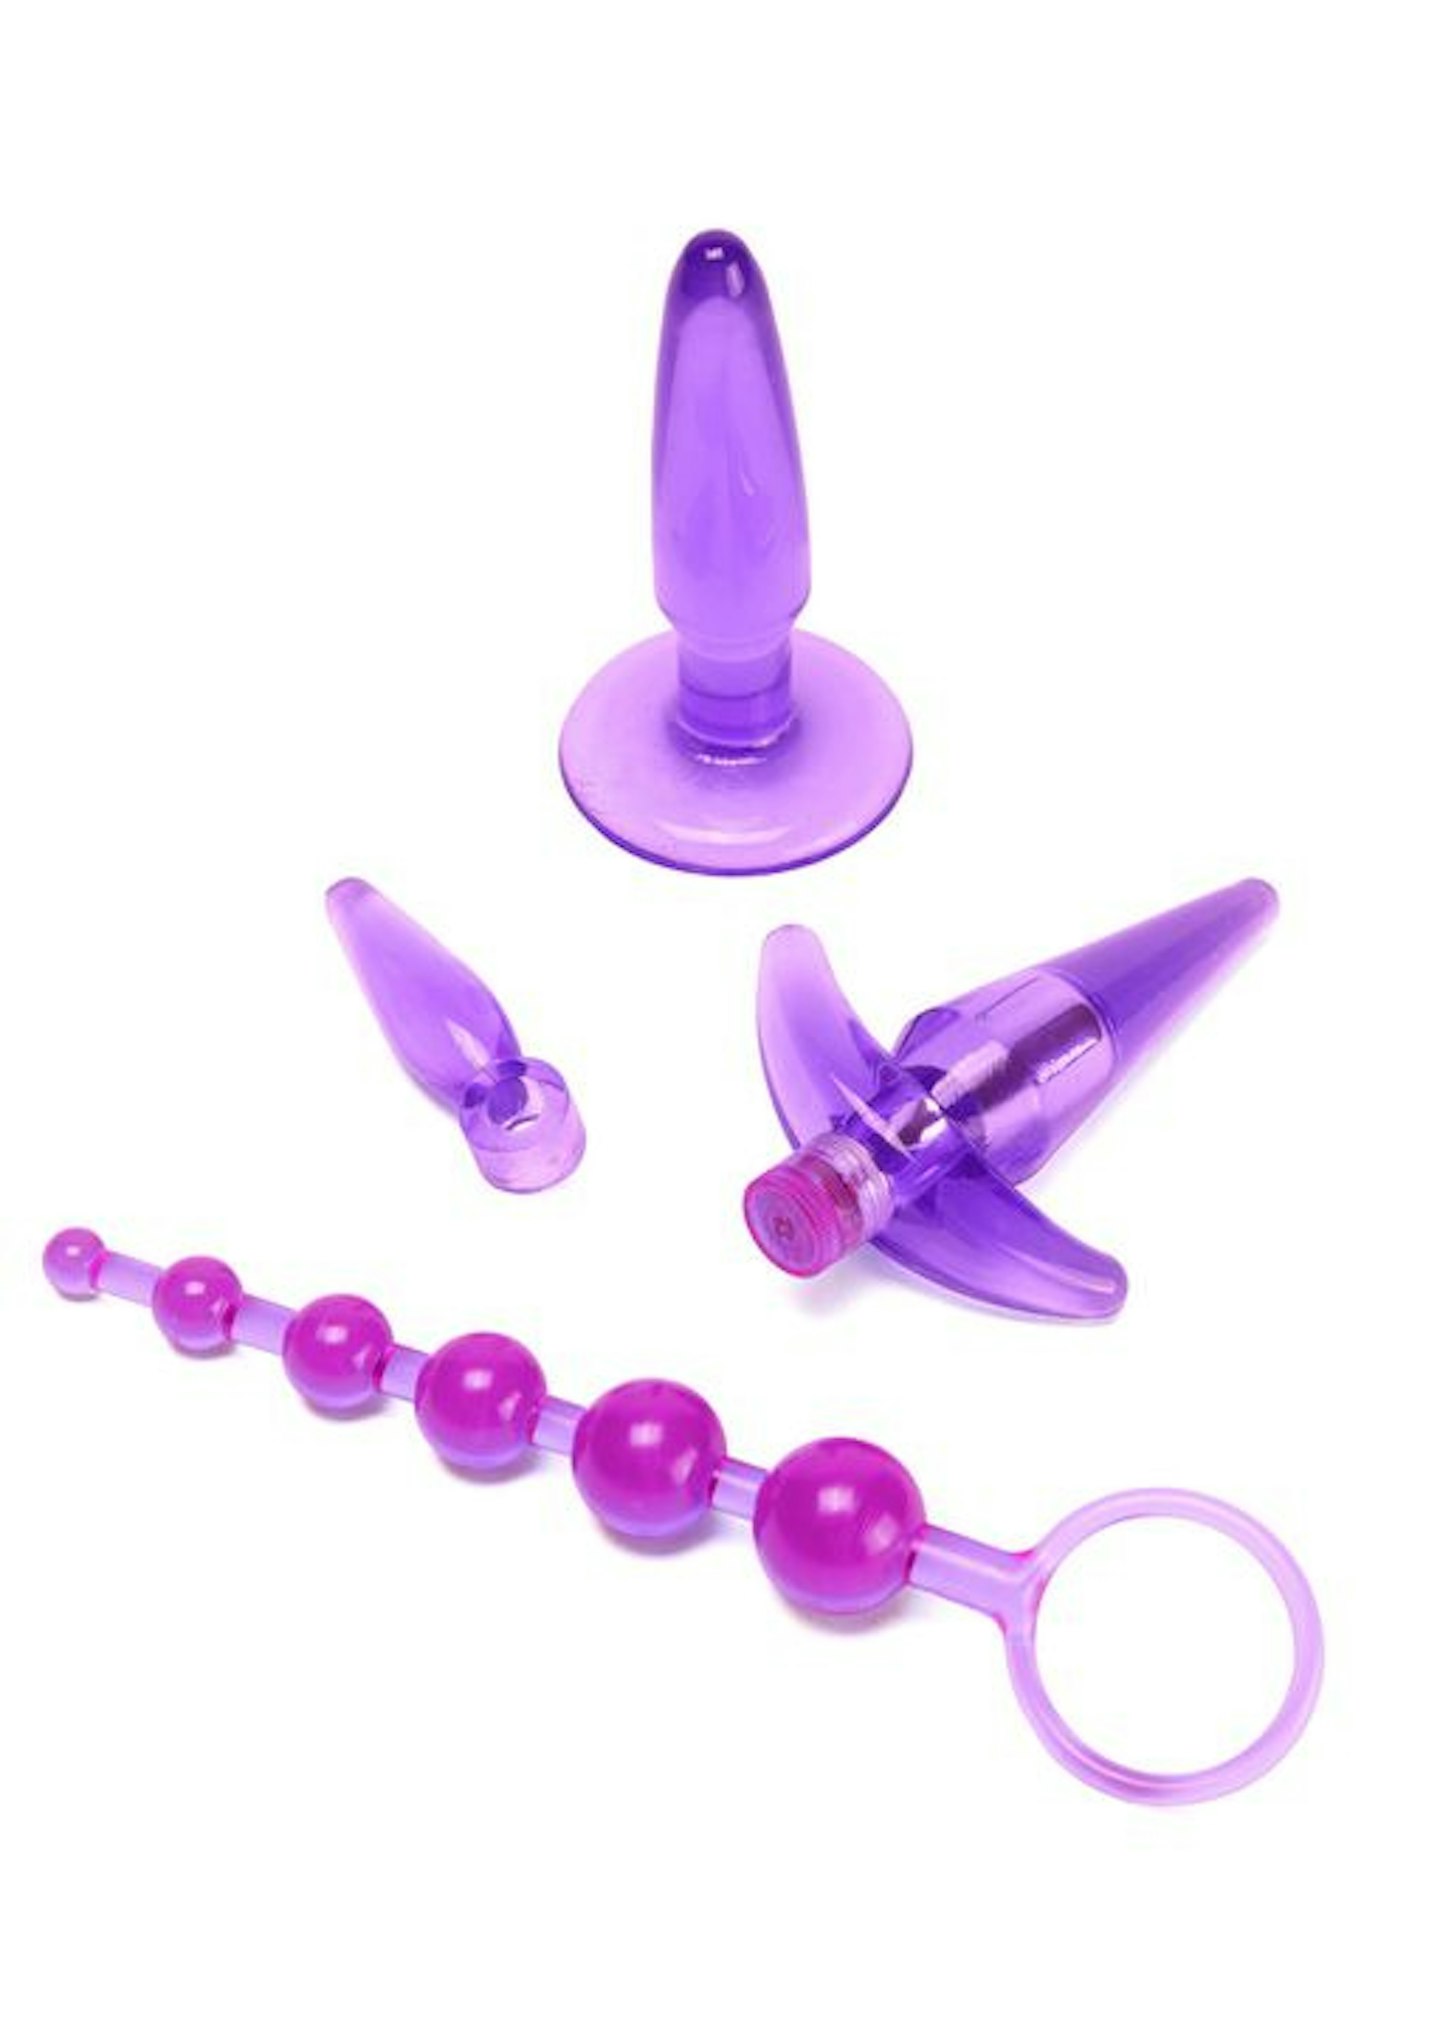 Ann Summers Intro To Anal Kit